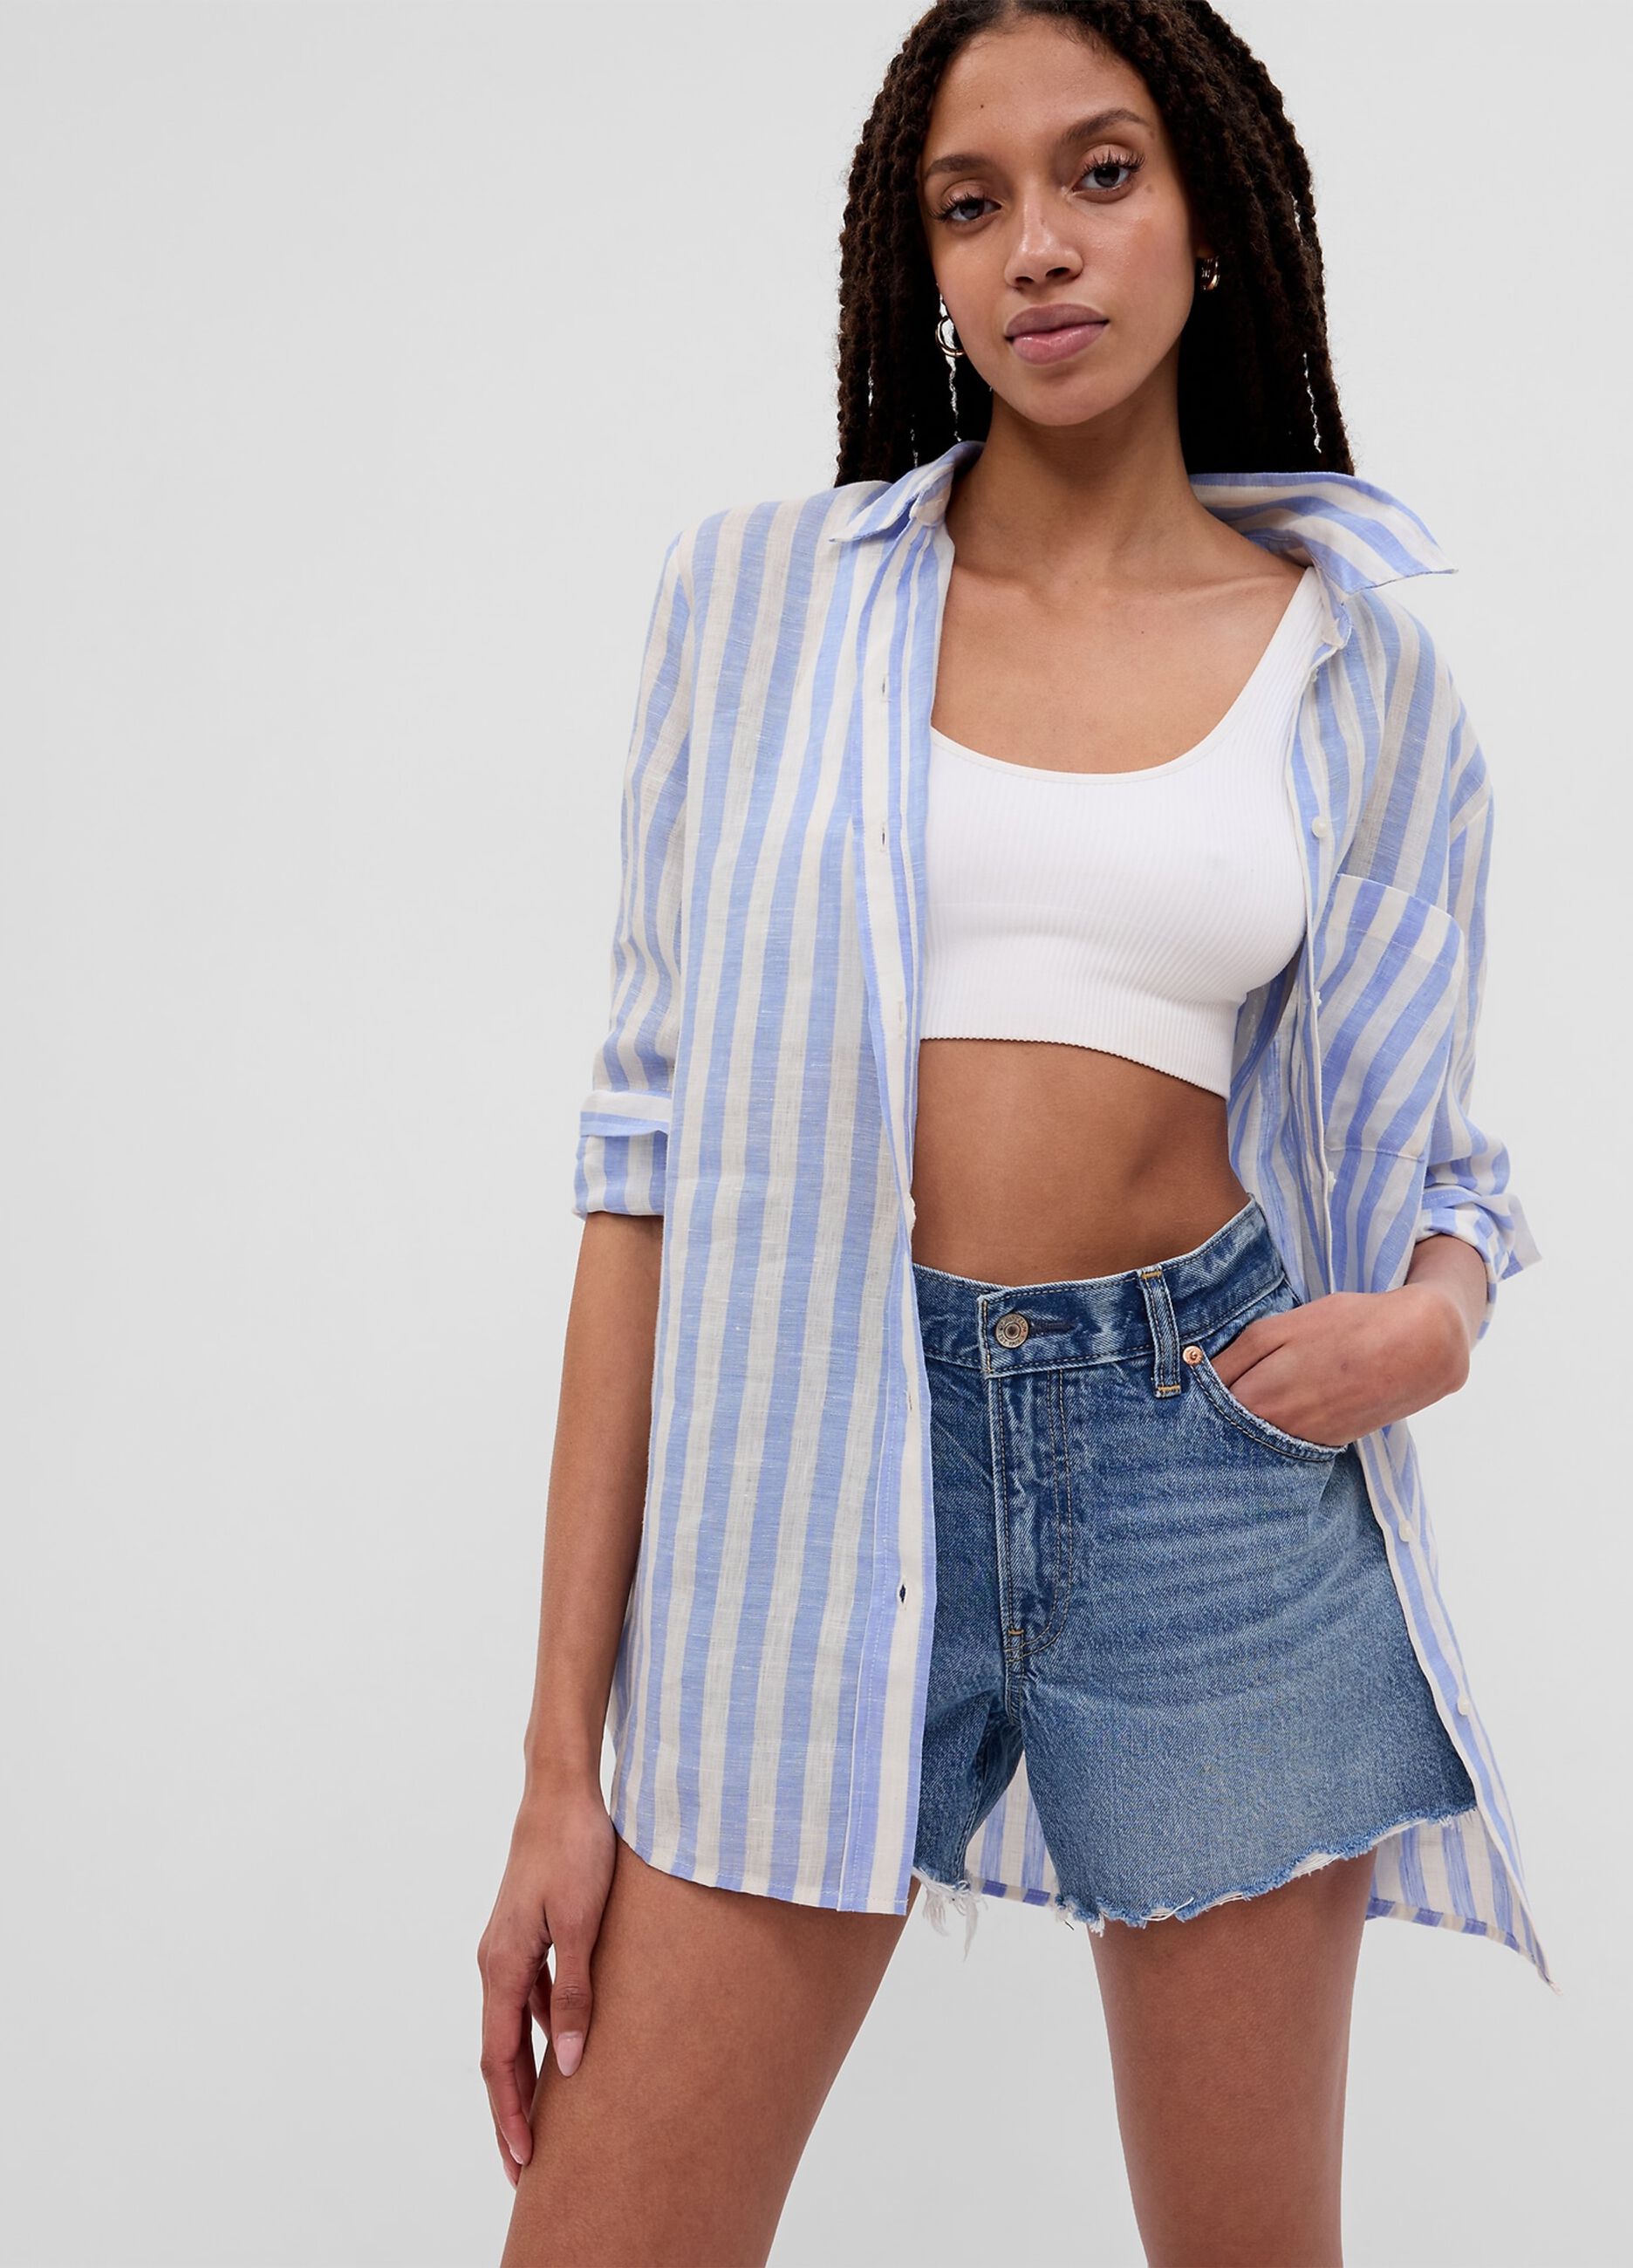 Striped linen shirt with pocket